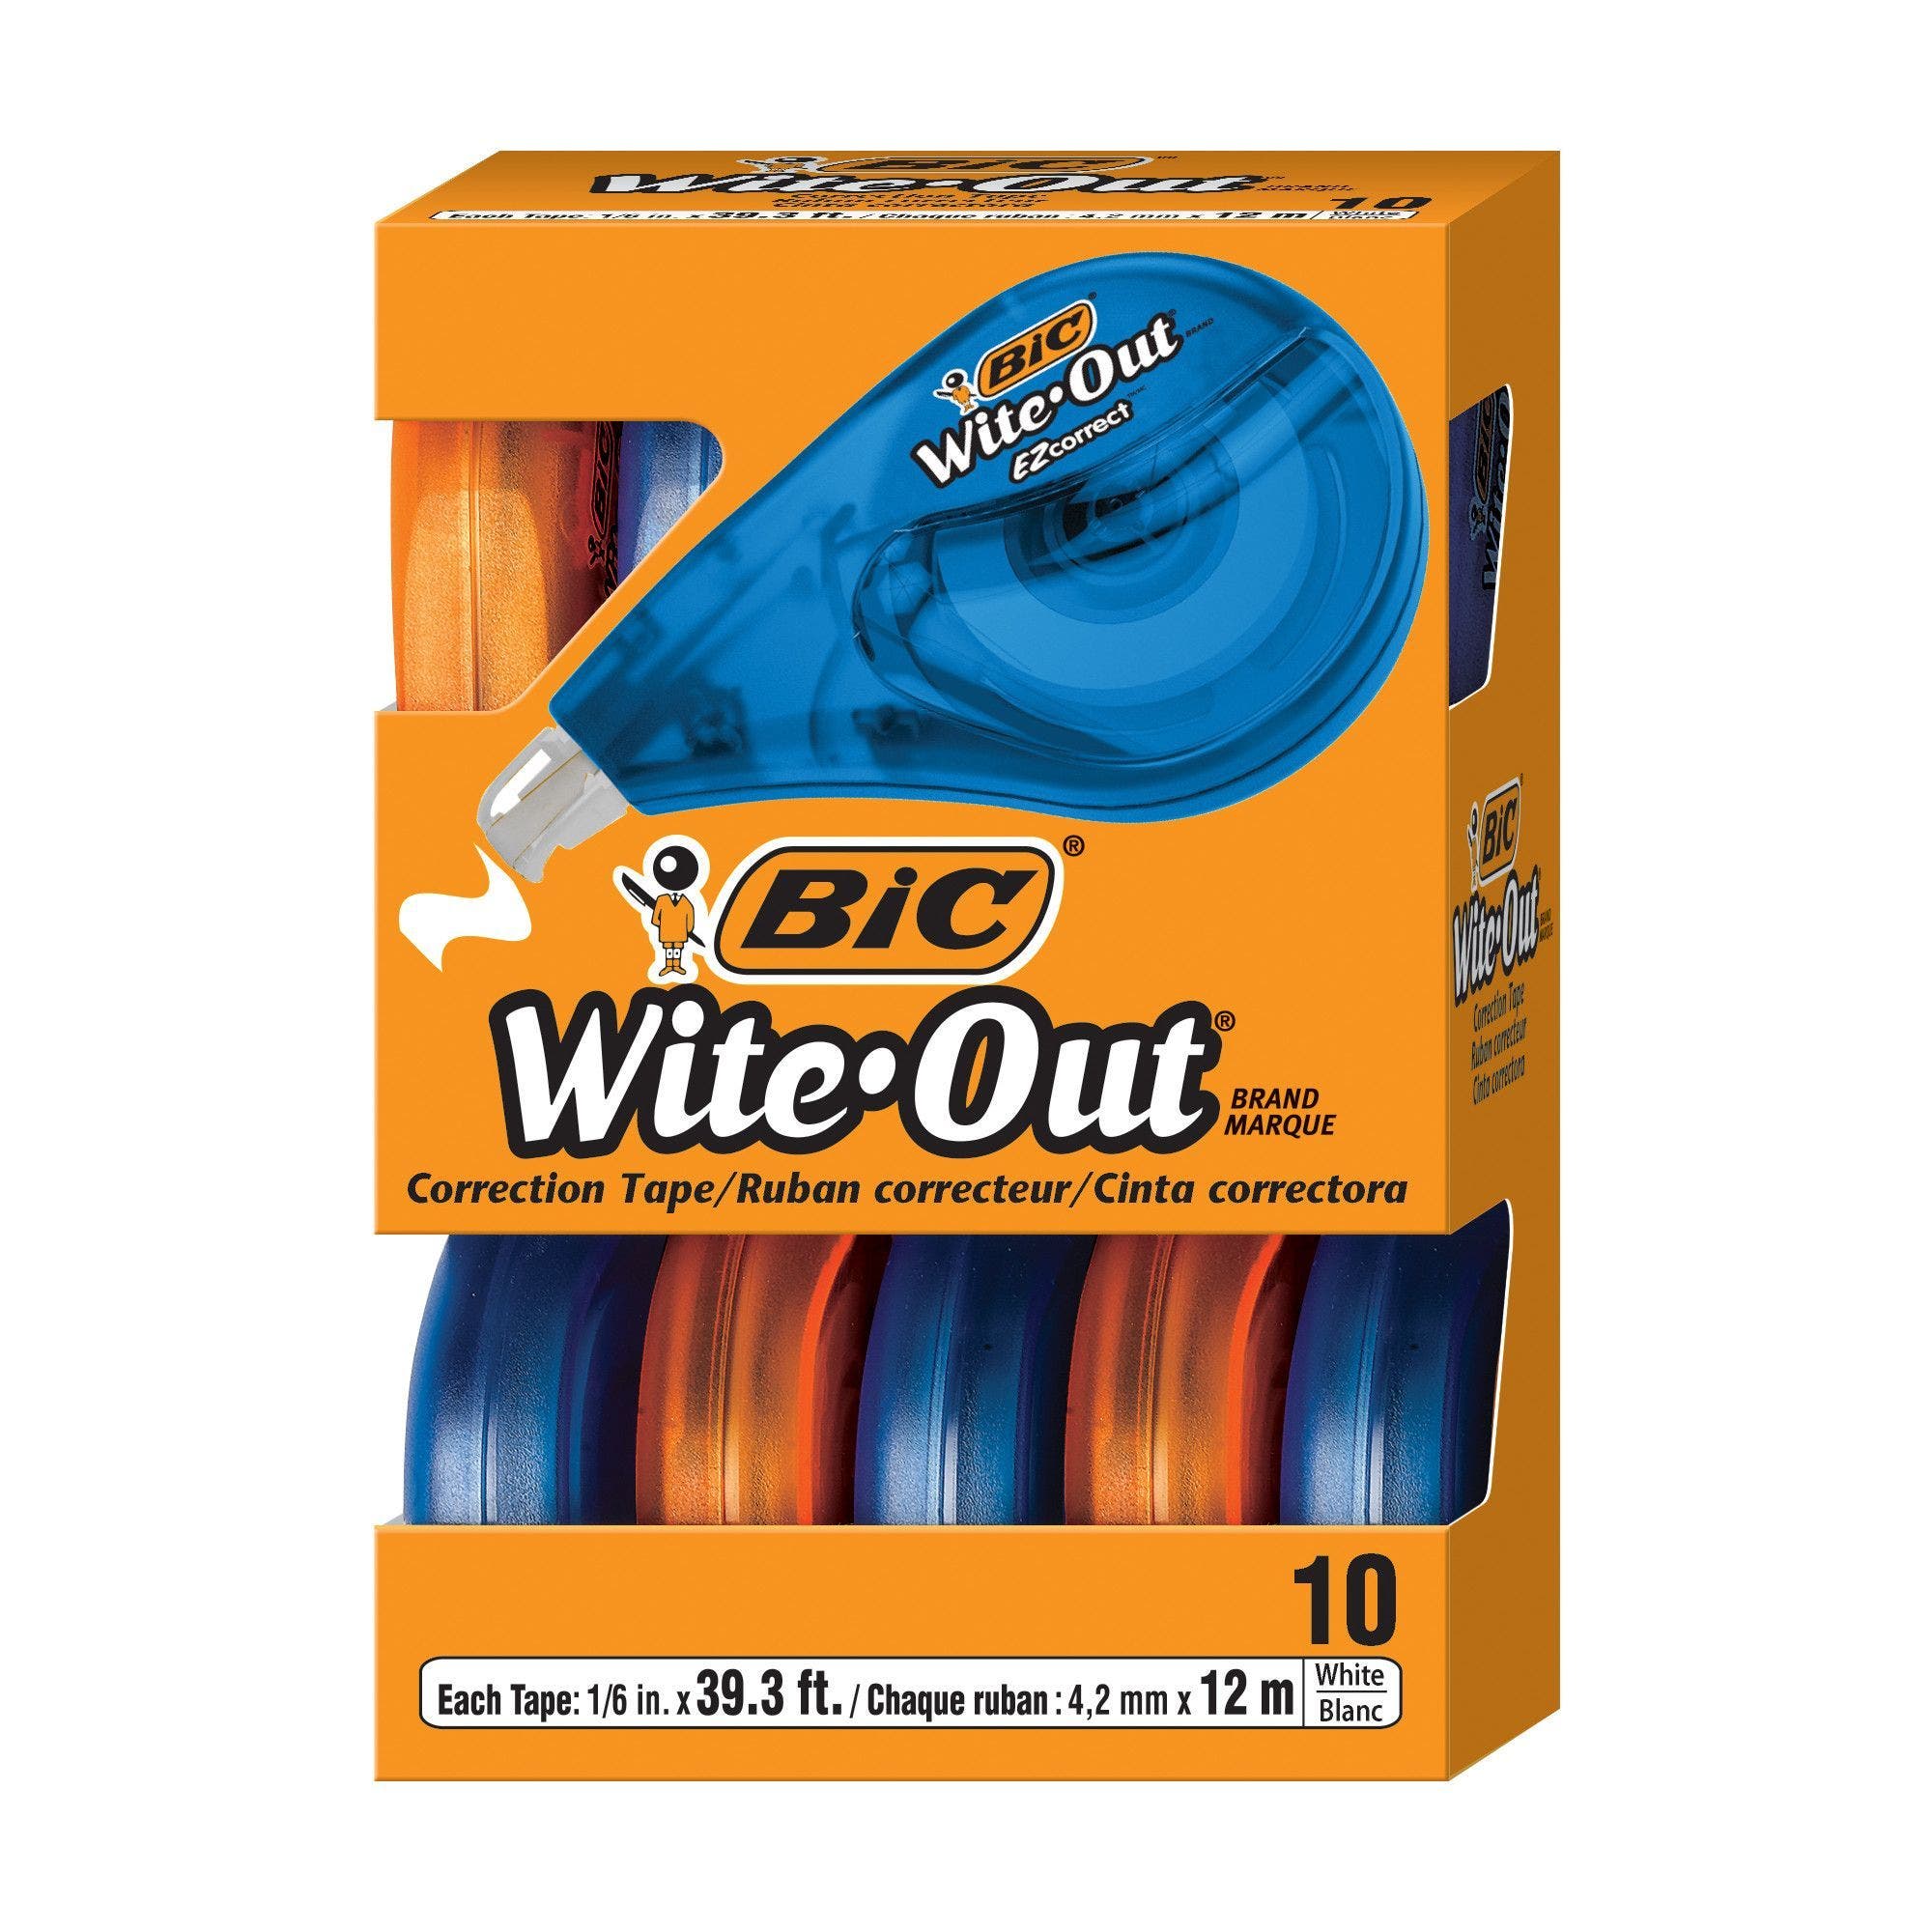 2-Count BIC Wite-Out Brand EZ Correct Grip Correction Tape White 2 Pack 